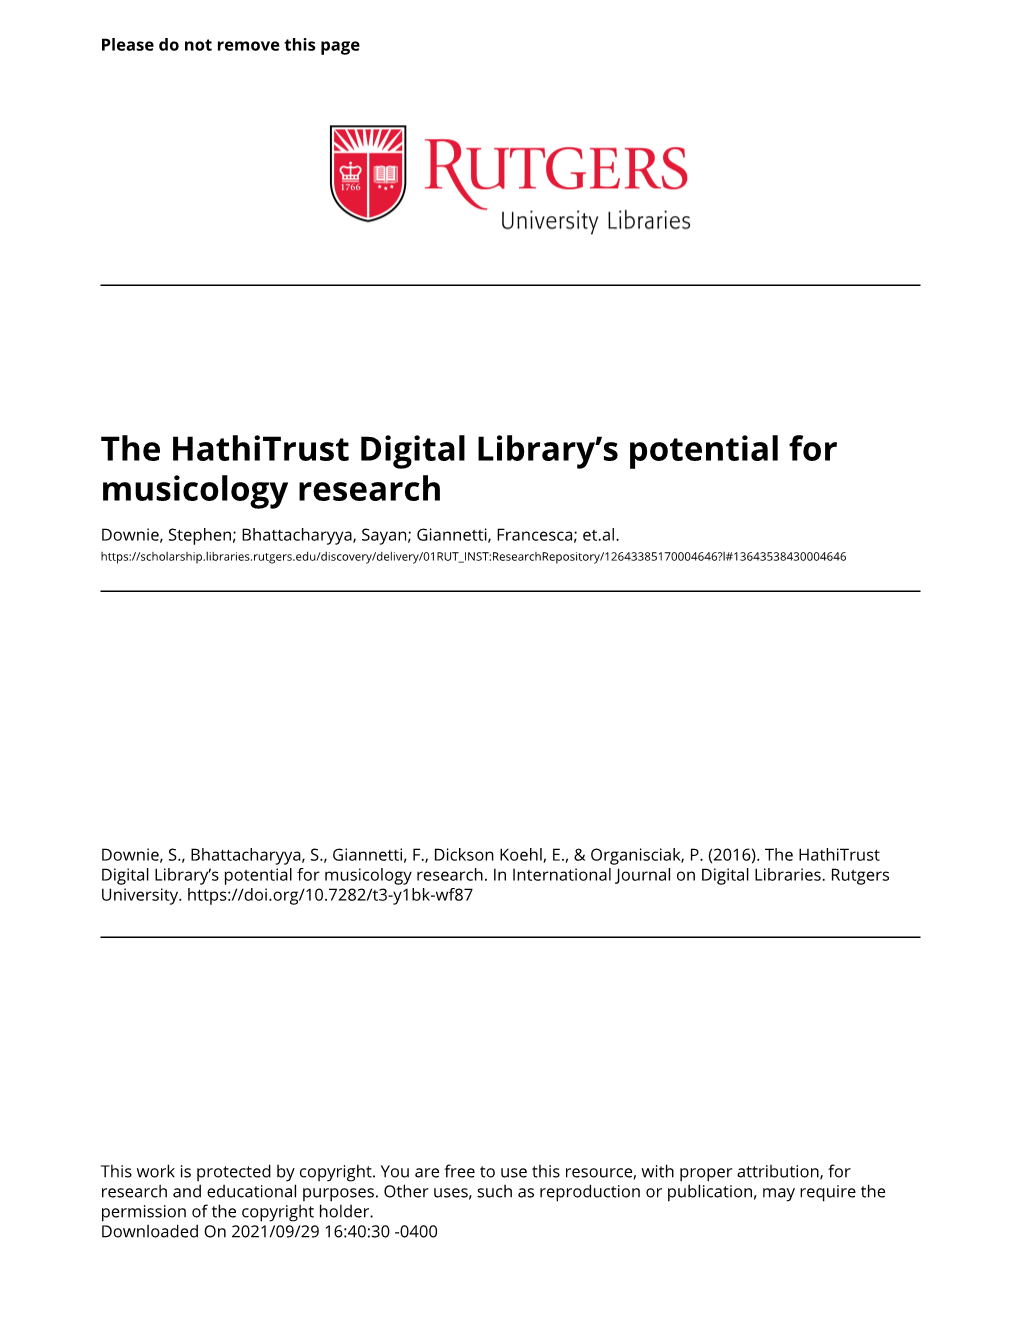 The Hathitrust Digital Library's Potential for Musicology Research